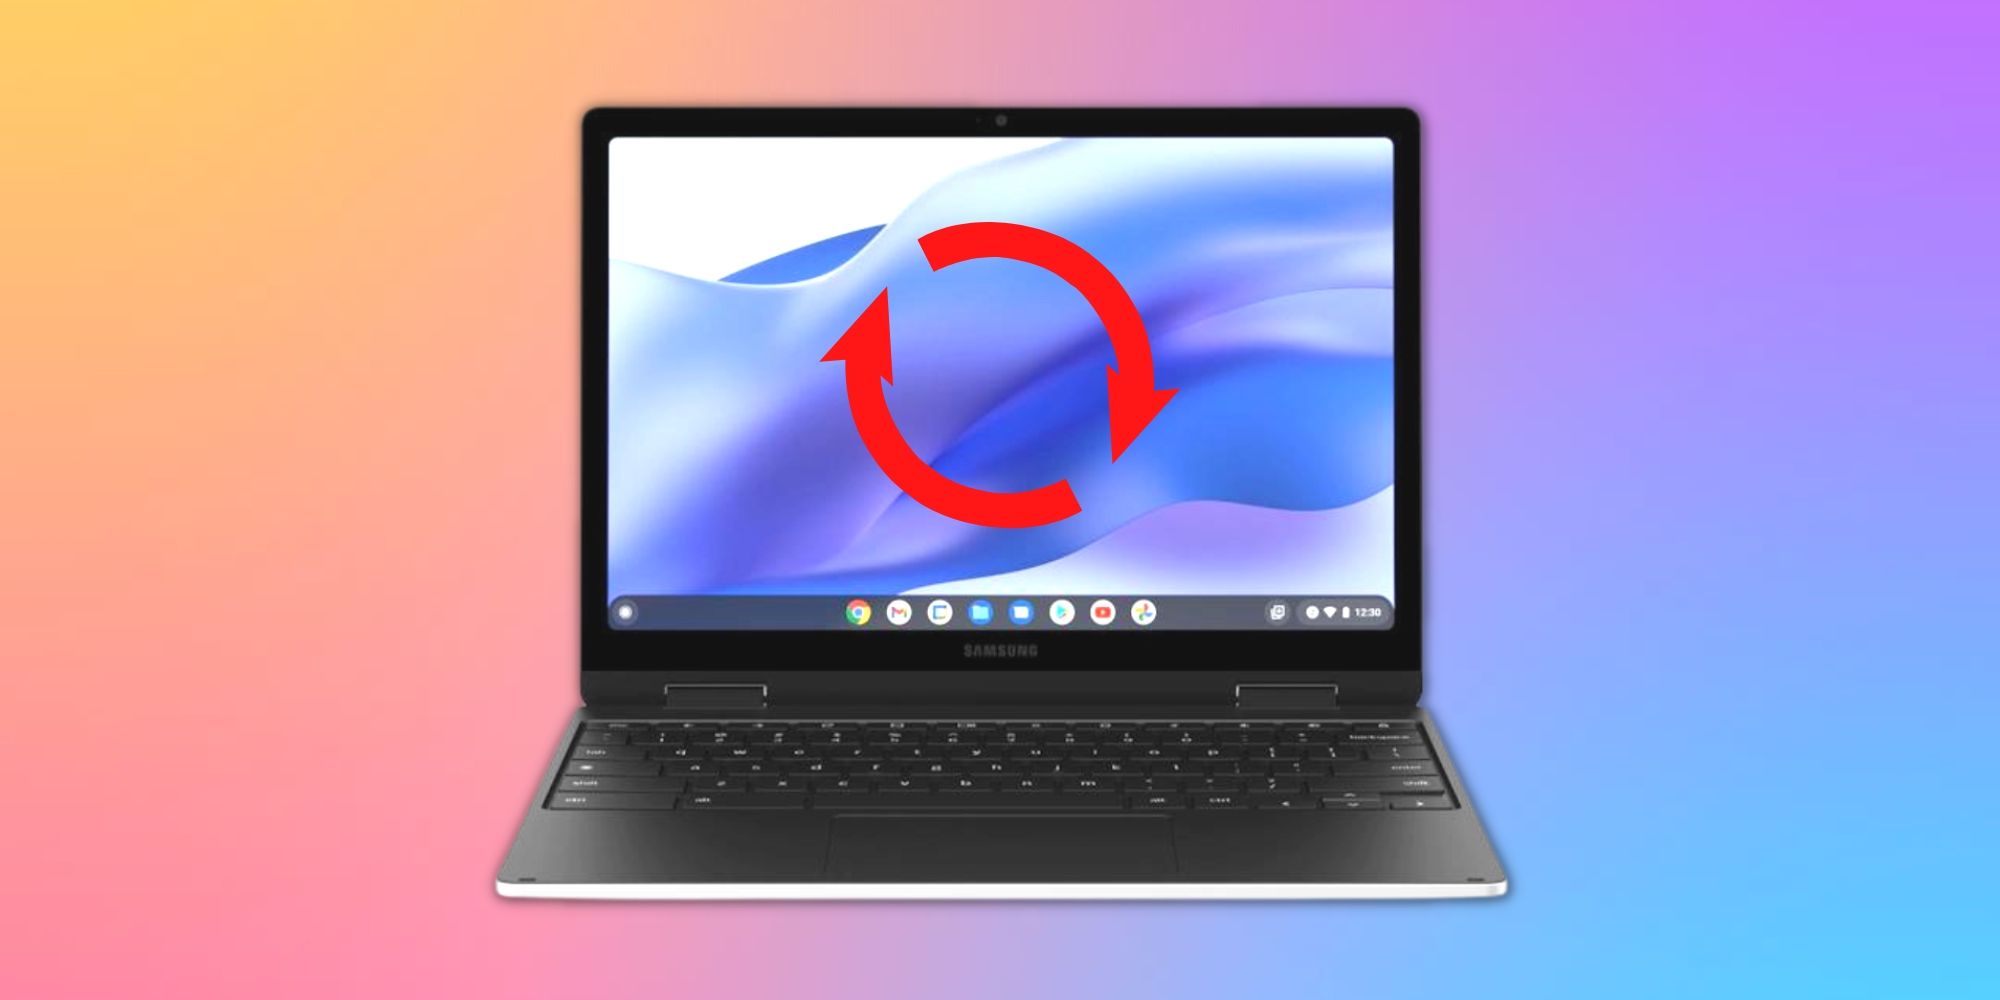 Image of a Chromebook with rotation sign on the screen